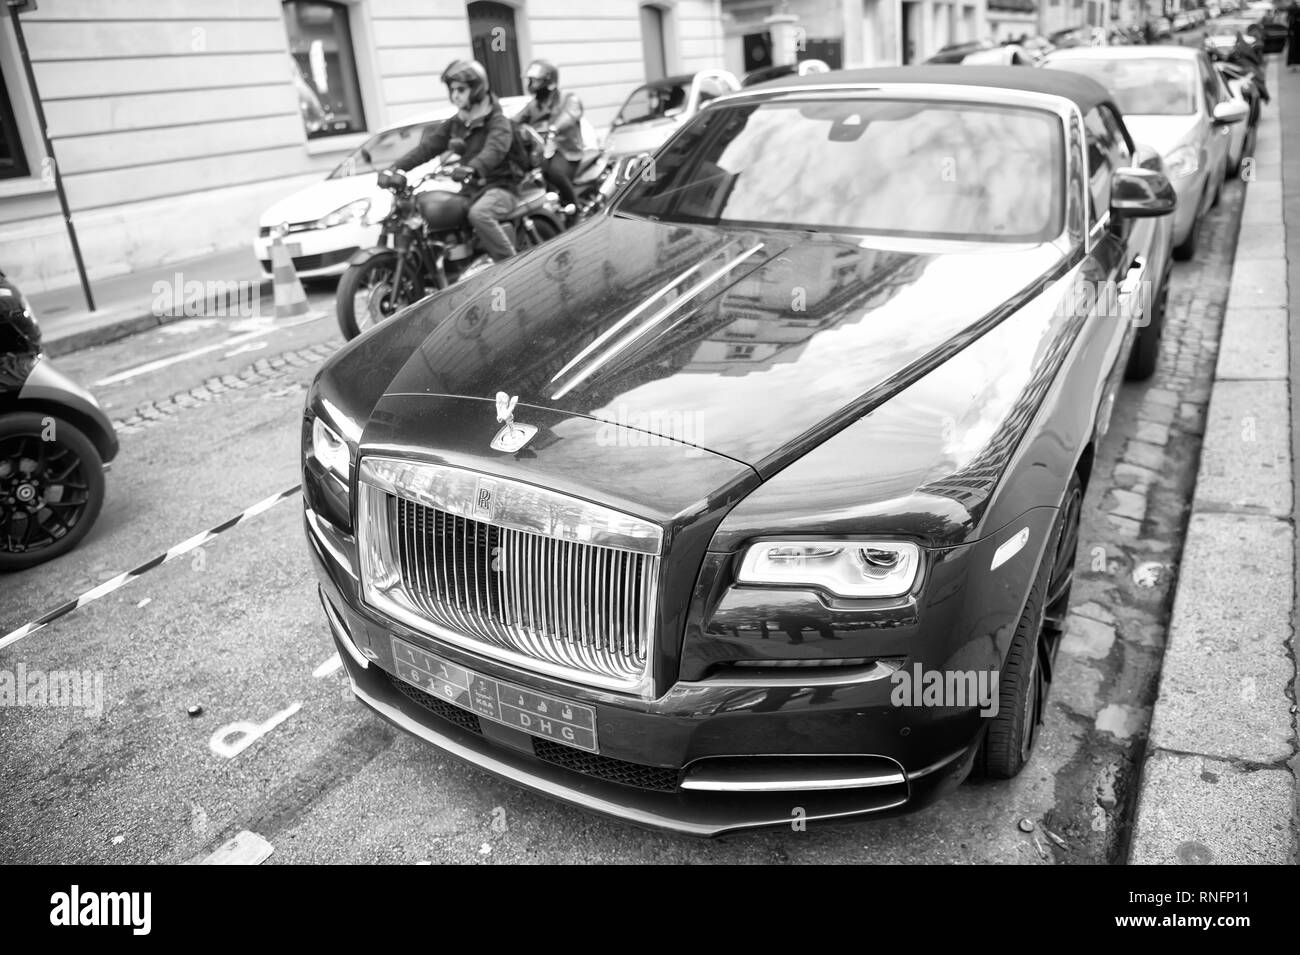 Paris, France - September 26, 23, 2017: luxury Supercar rolls royce rolls-royce ghost blue and gold color parked on the street in Paris. rolls royce rolls-royce is famous expensive automobile brand car Stock Photo